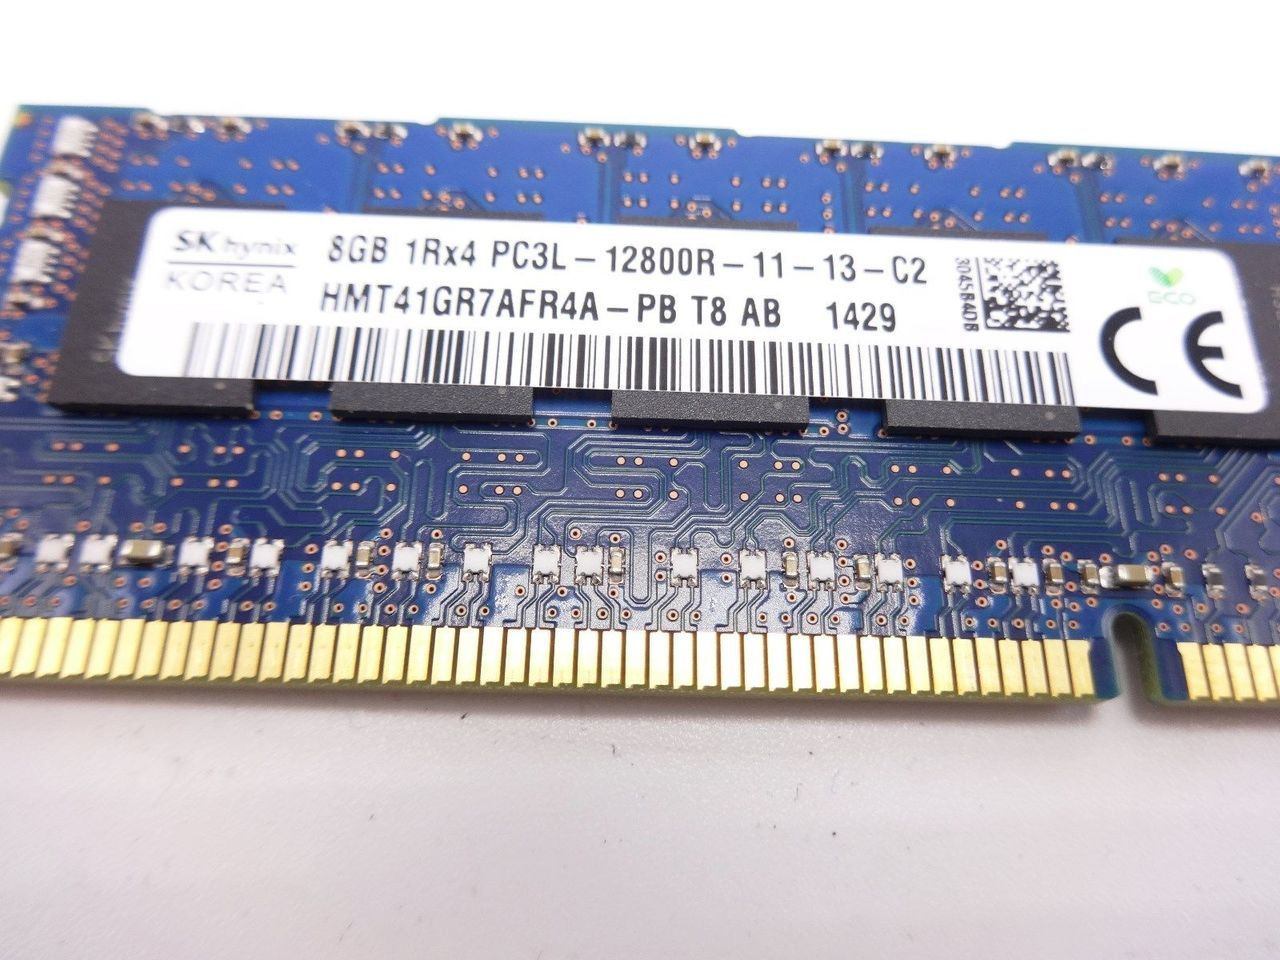 HYNIX HMT41GR7AFR4A-PB 8GB PC3L 12800R 1RX4 memory dimm ***Server memory only***